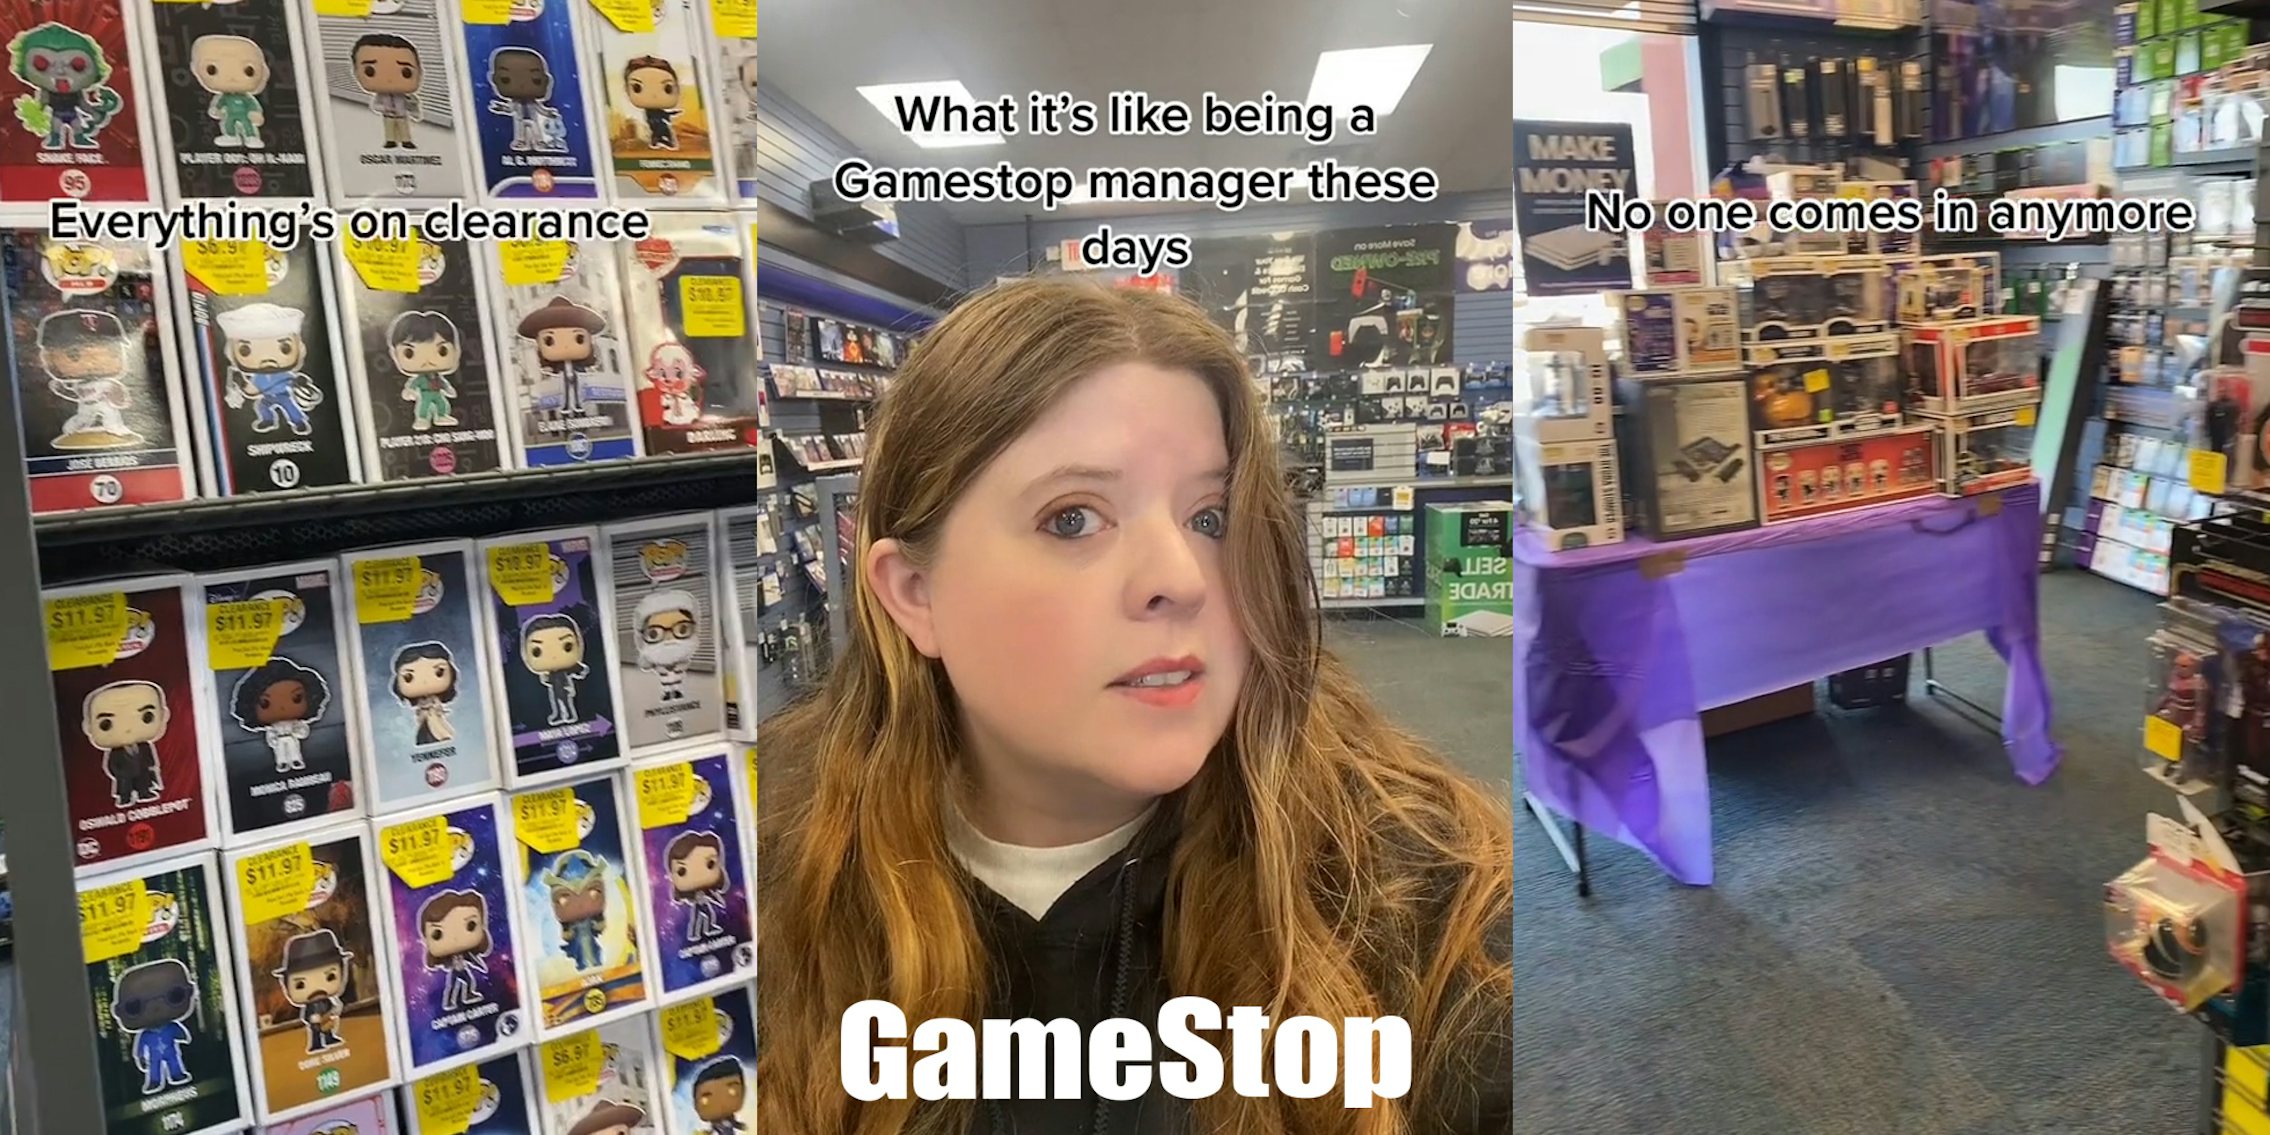 Game Stop Funko Pop shelf with caption 'Everything's on clearance' (l) Game Stop employee speaking with caption 'What it's like being a GameStop manager these days' with Game Stop logo at bottom (c) Game Stop displays with caption 'No one comes in anymore' (r)